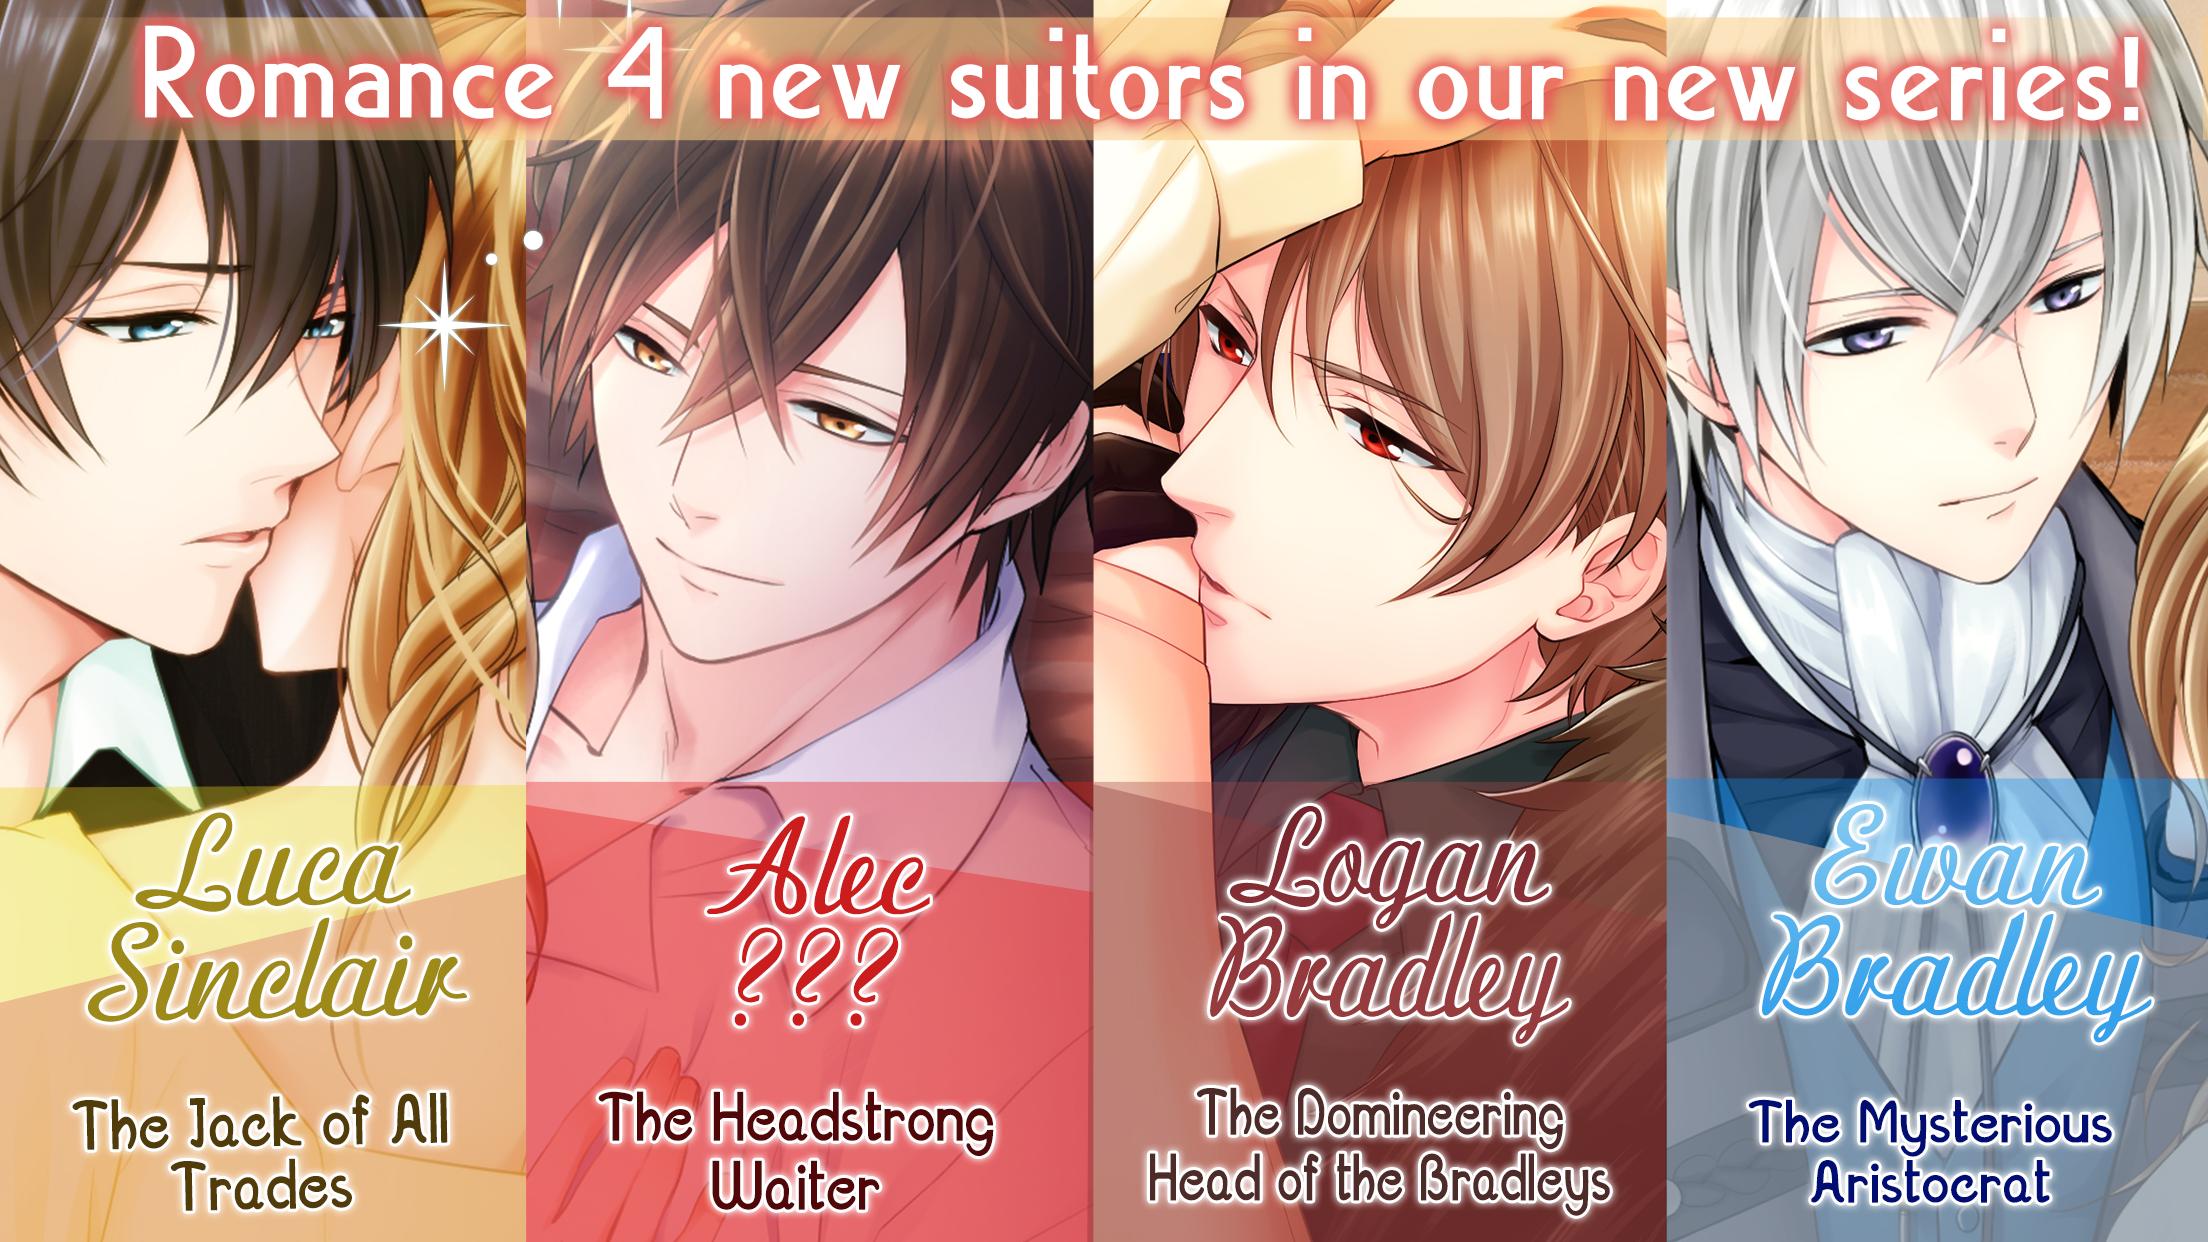 Romance otome games. Otome Romance игры. Otome novels. Визуальные новеллы отоме. Otome games Android.